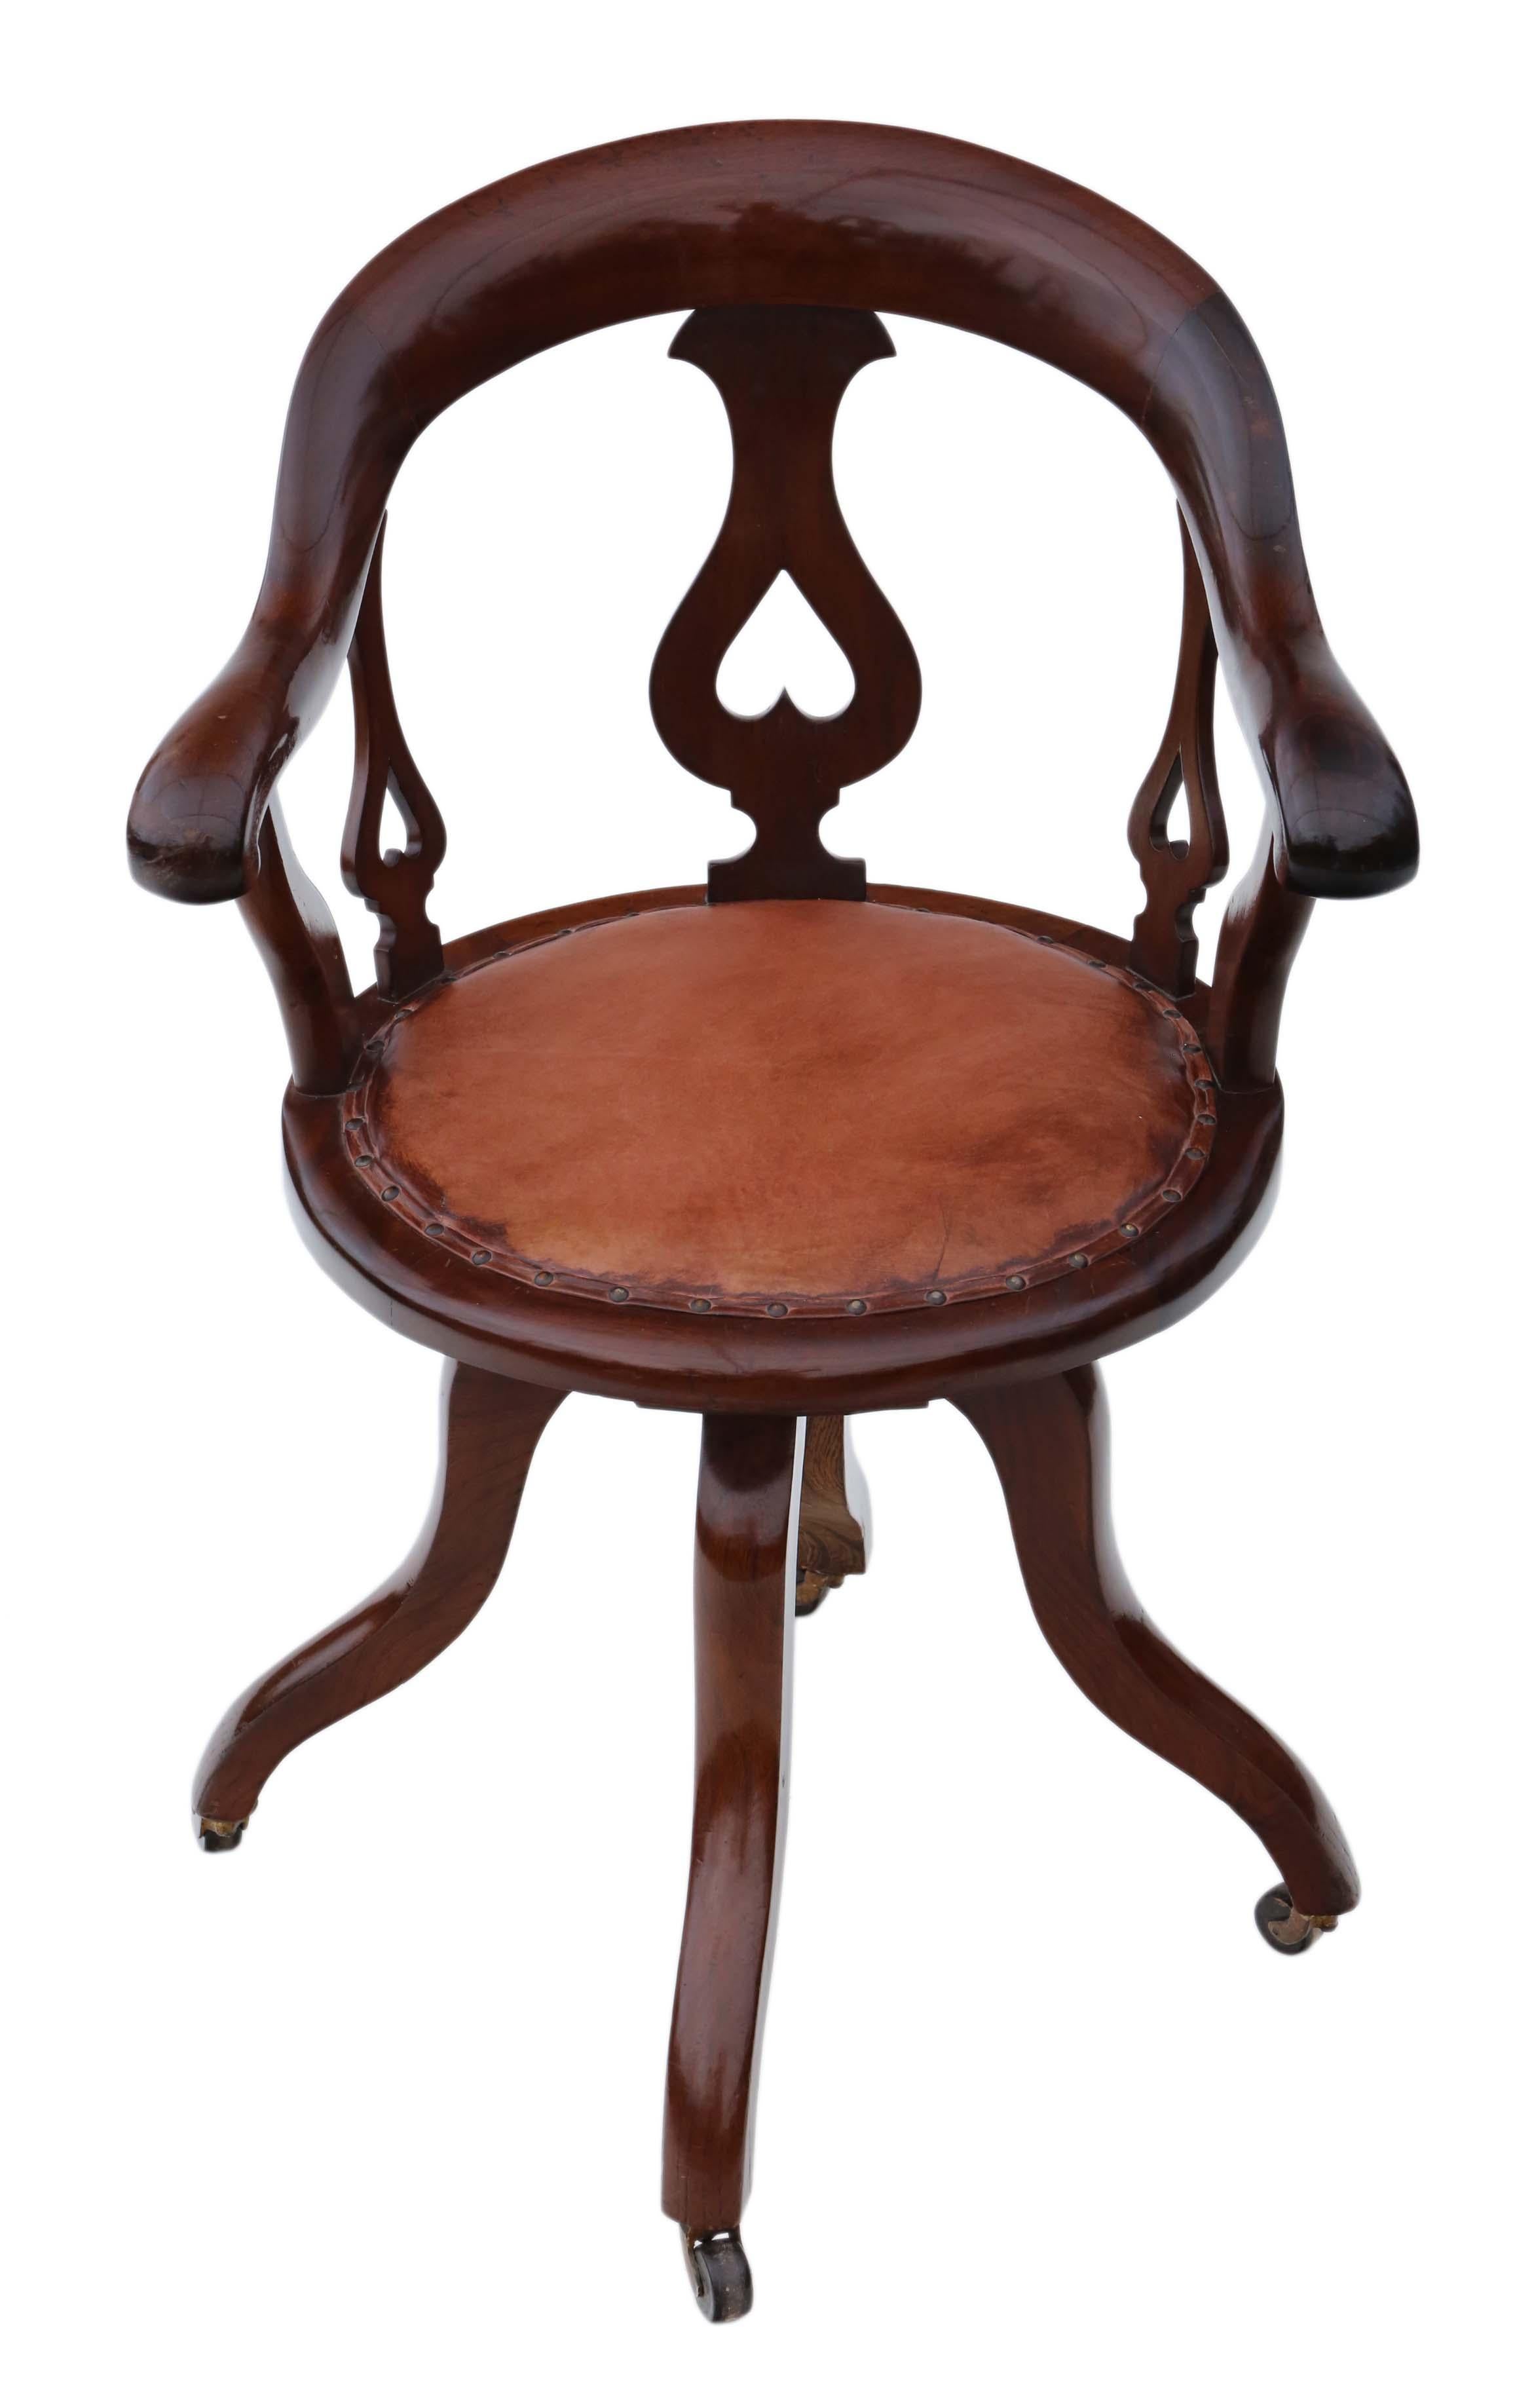 Antique Victorian circa 1900, mahogany and elm construction, leather seat swivel desk office chair.

Fantastic quality decorative functional piece. Swivels freely without too much play in the mechanism. Brass and ceramic castors (some wear as one